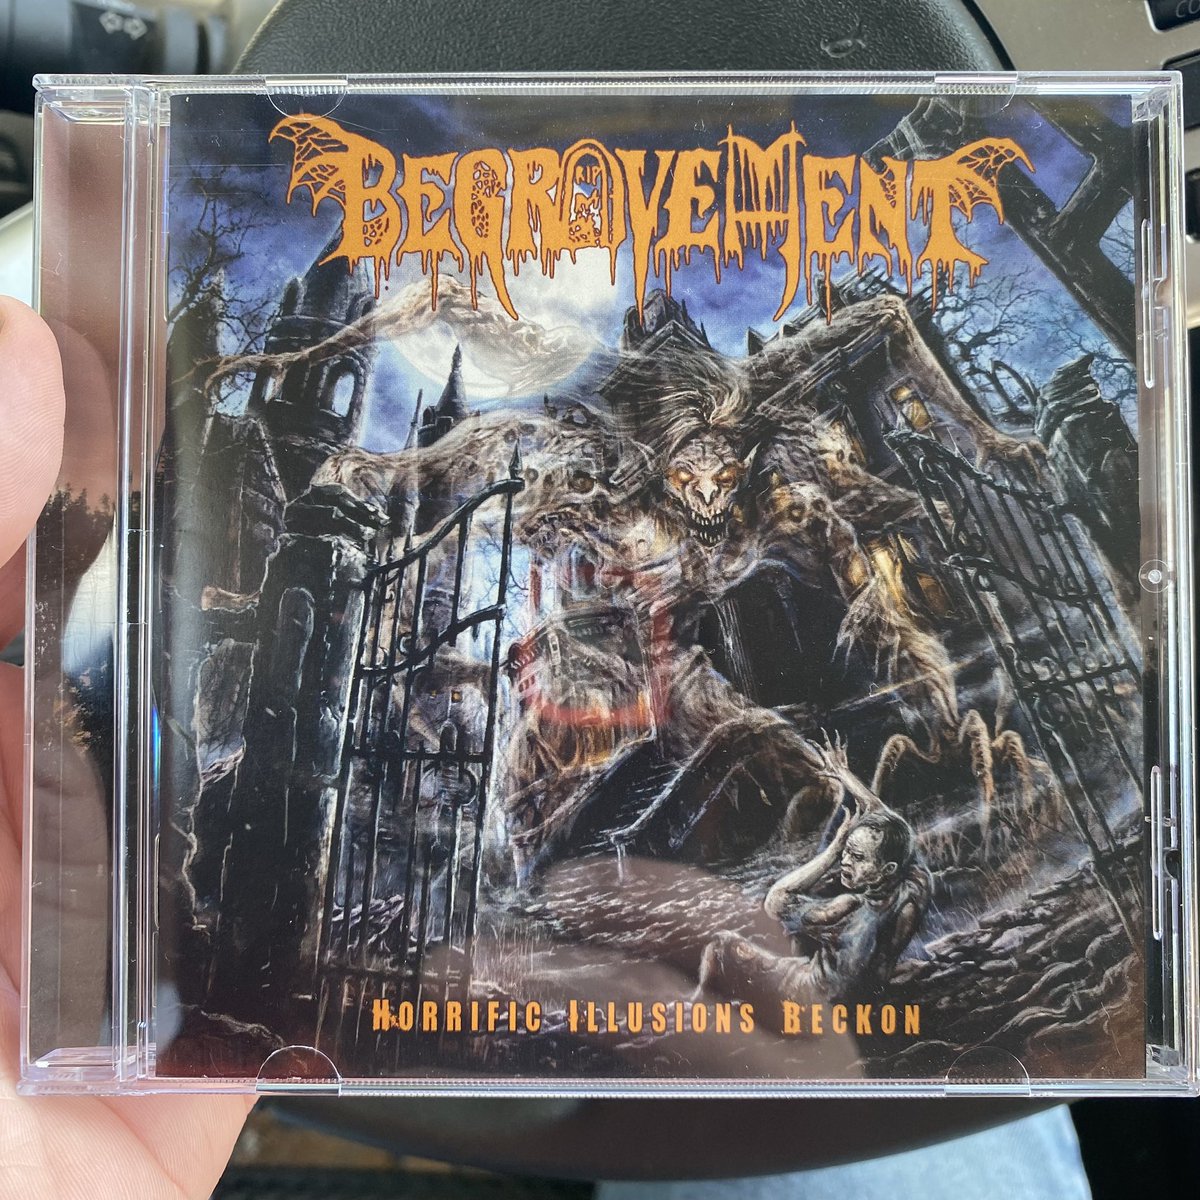 Road tunes with this favorite from last year. Exactly my kinda death metal, FFO: The Chasm, Death, Morbid Angel, Deceased, Intestine Baalism begravement.bandcamp.com/album/horrific…